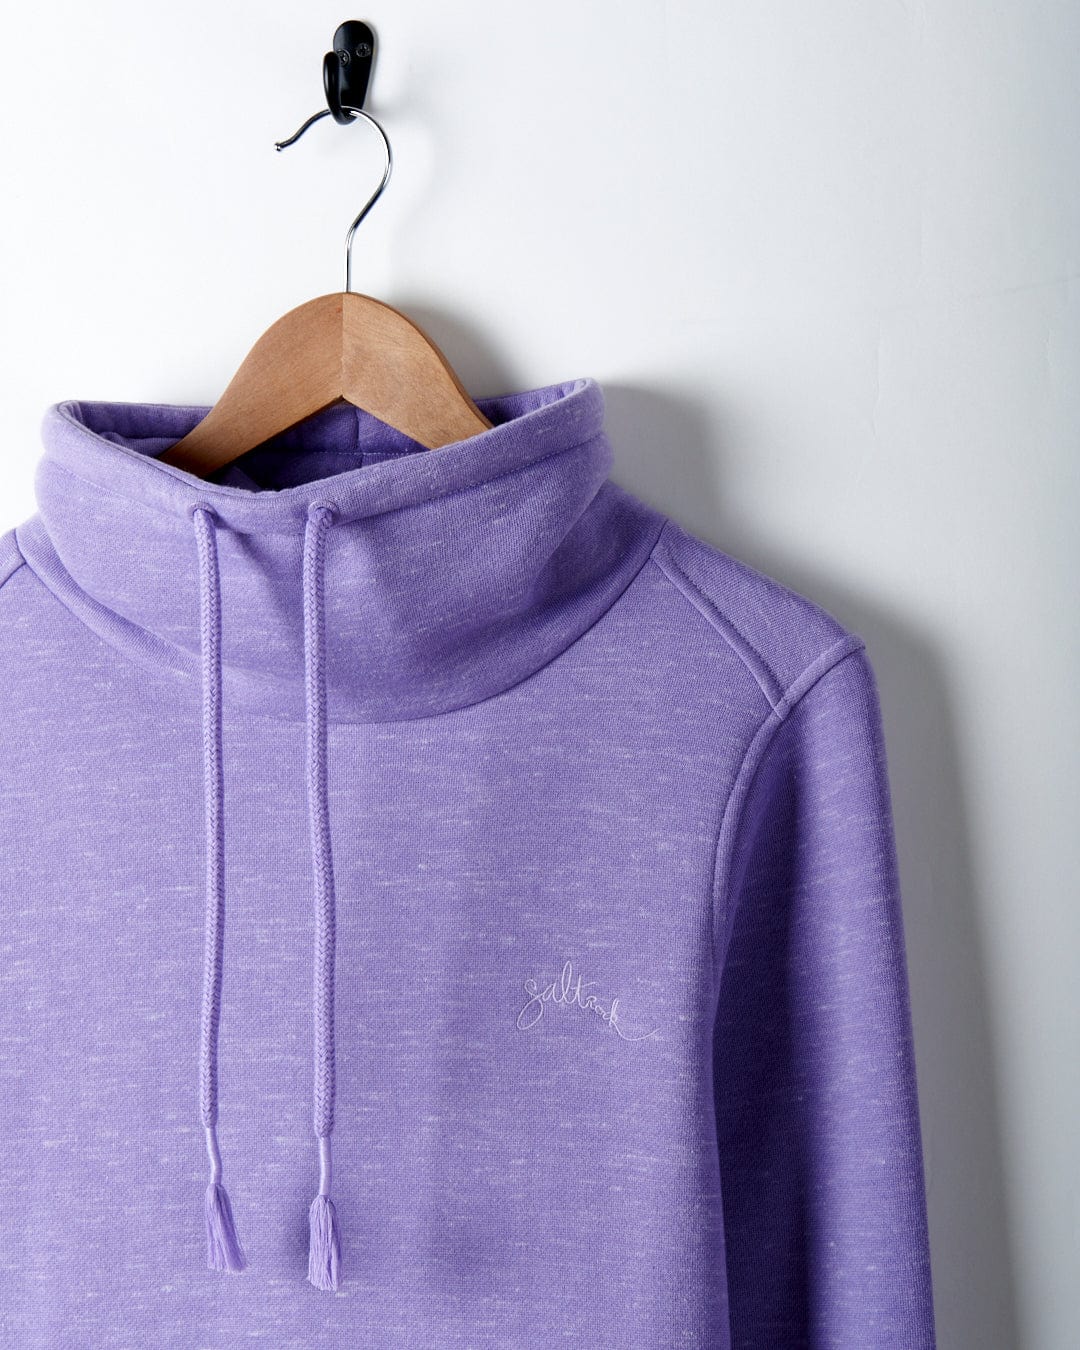 A Harper - Womens Longline Pop Sweat - Lilac with Saltrock embroidered branding hanging on a hanger.